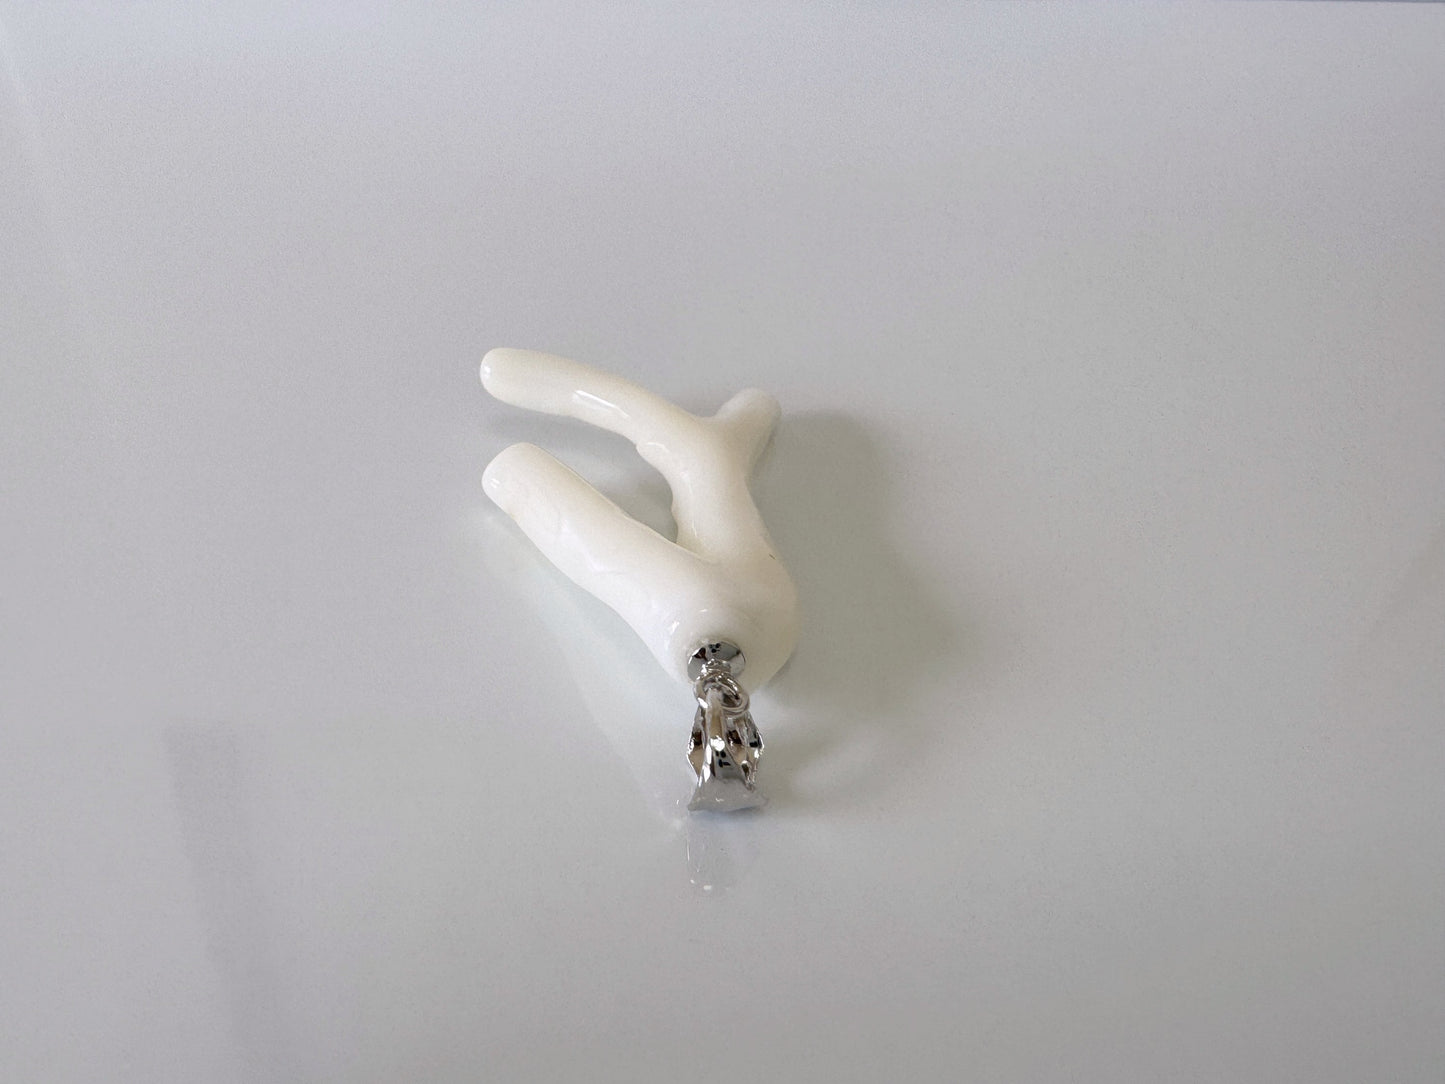 Natural White Coral Branch Pendant, Natural color, Japanese White Precious Coral, Silver Bail (rhodium-plated)